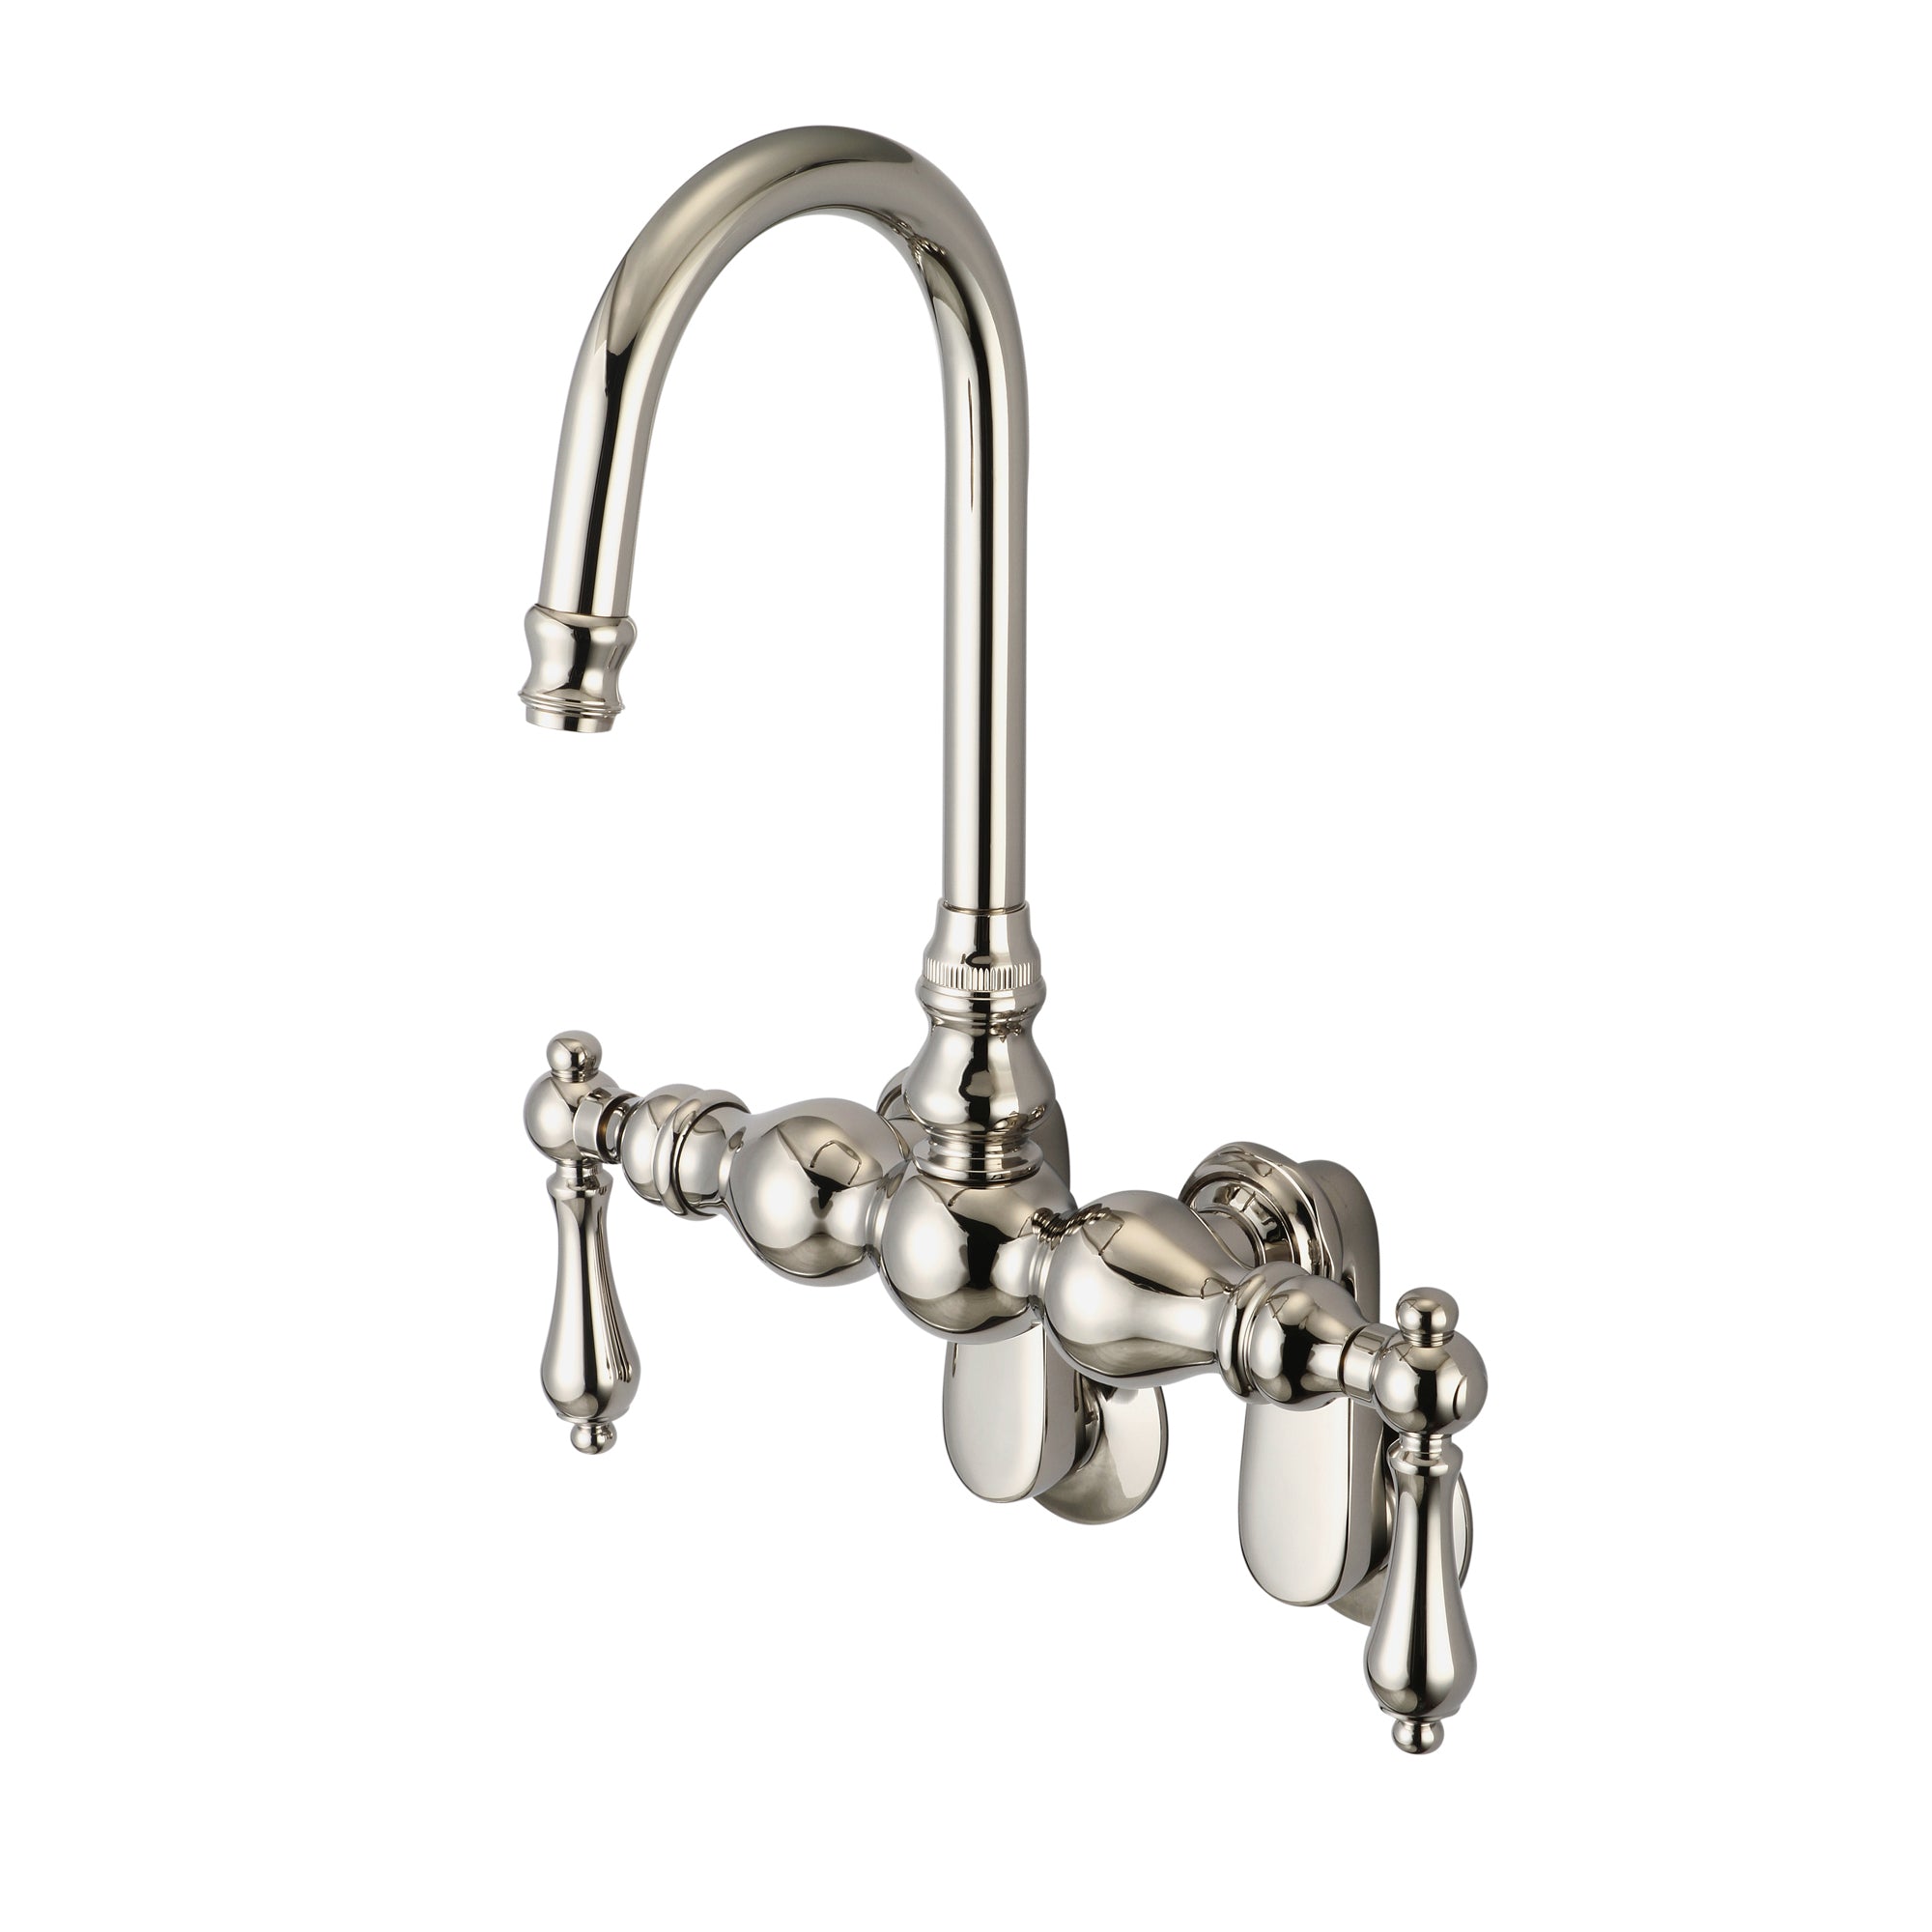 Water Creation | Vintage Classic Adjustable Spread Wall Mount Tub Faucet With Gooseneck Spout & Swivel Wall Connector in Polished Nickel (PVD) Finish With Metal Lever Handles Without Labels | F6-0015-05-AL